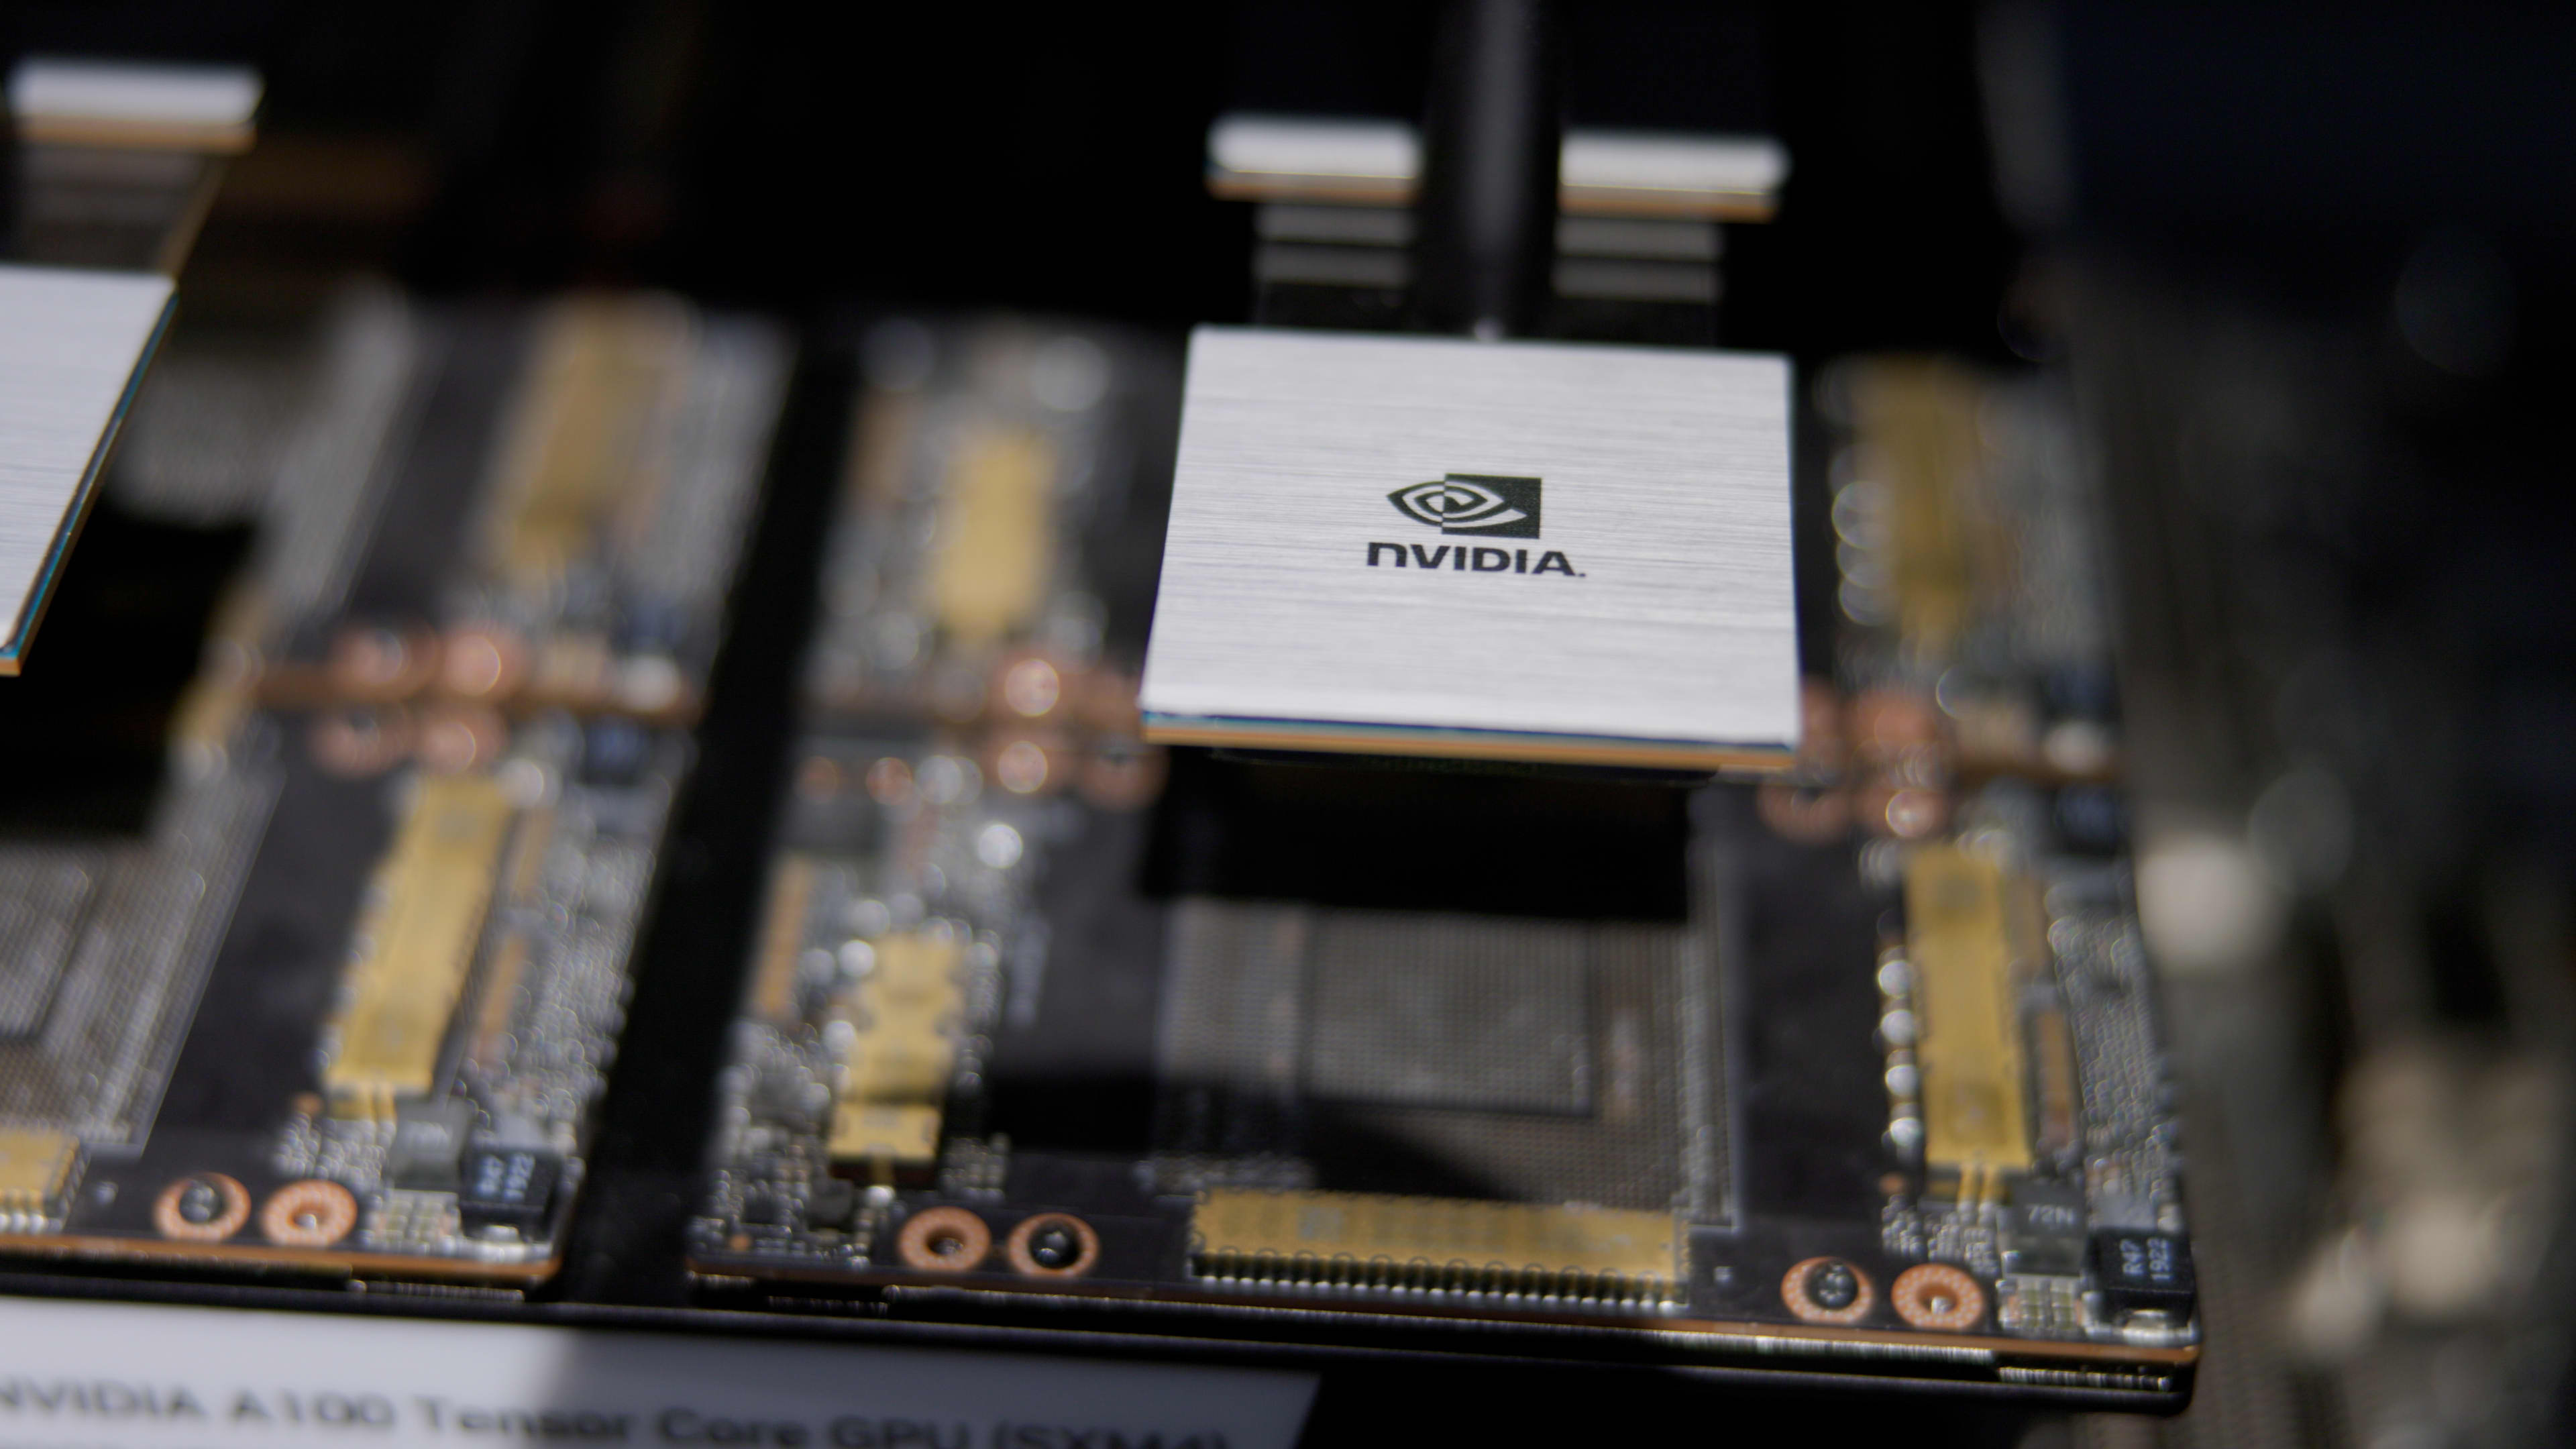 Nvidia expanded from gaming into A.I. Now the big bet is paying off as its chips power ChatGPT